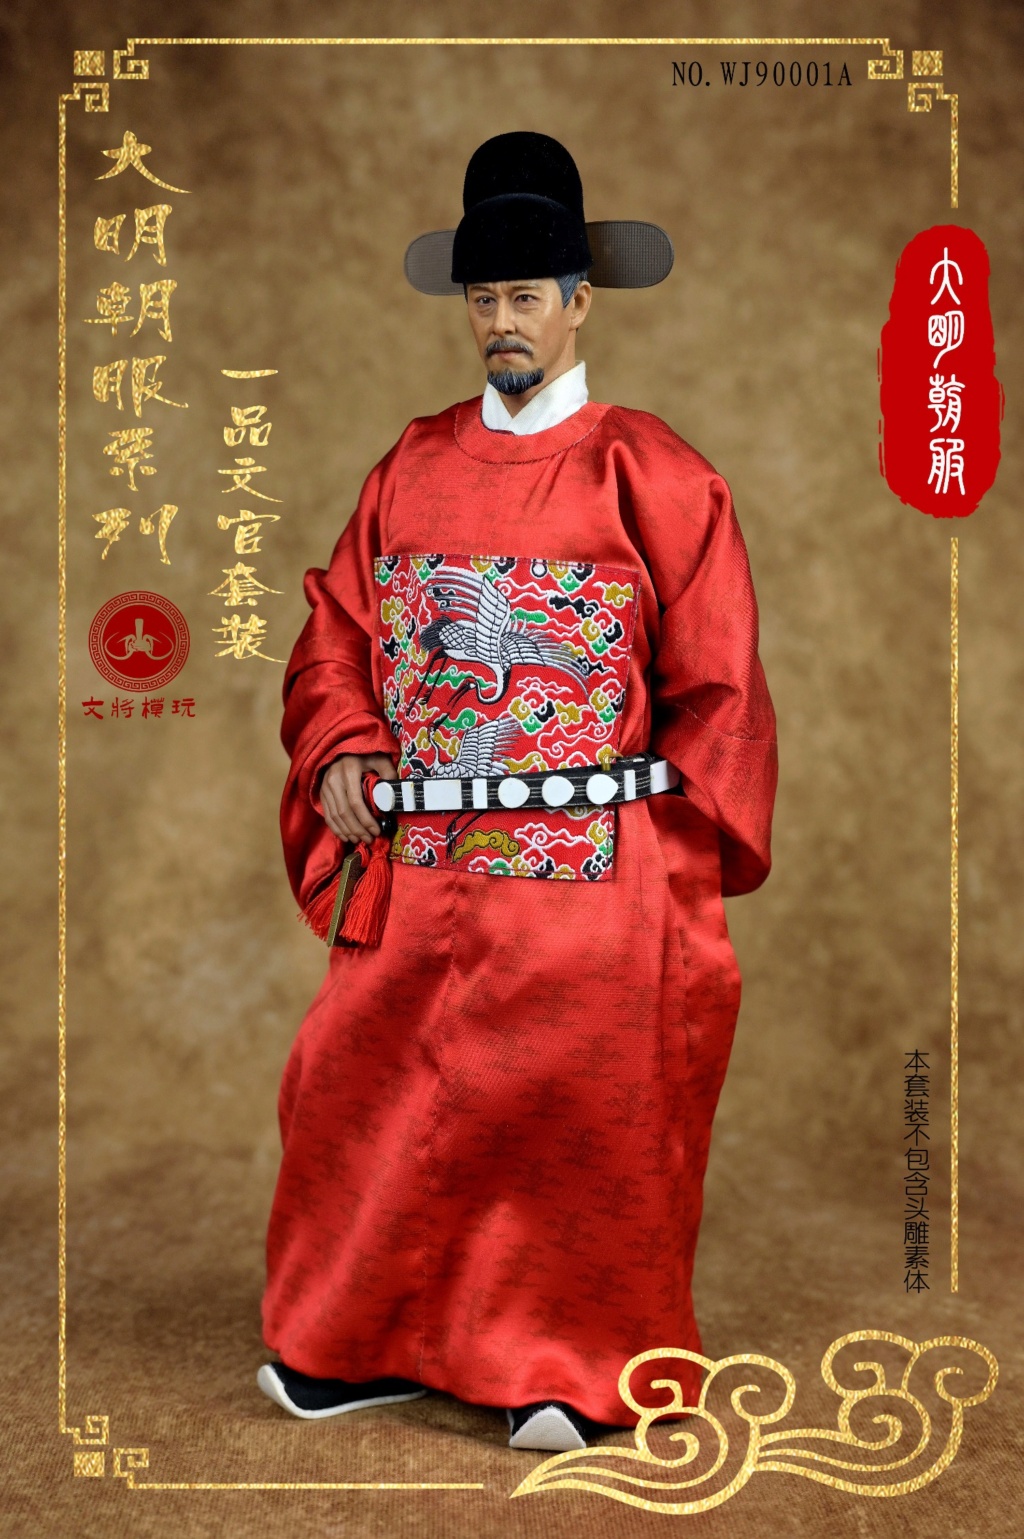 WenjiangModelPlay - NEW PRODUCT: Wenjiang Model Play: 1/6 Ming Dynasty Clothes Series - Yipin Civilian/Military Officer Set WJ90001A/B 16473810